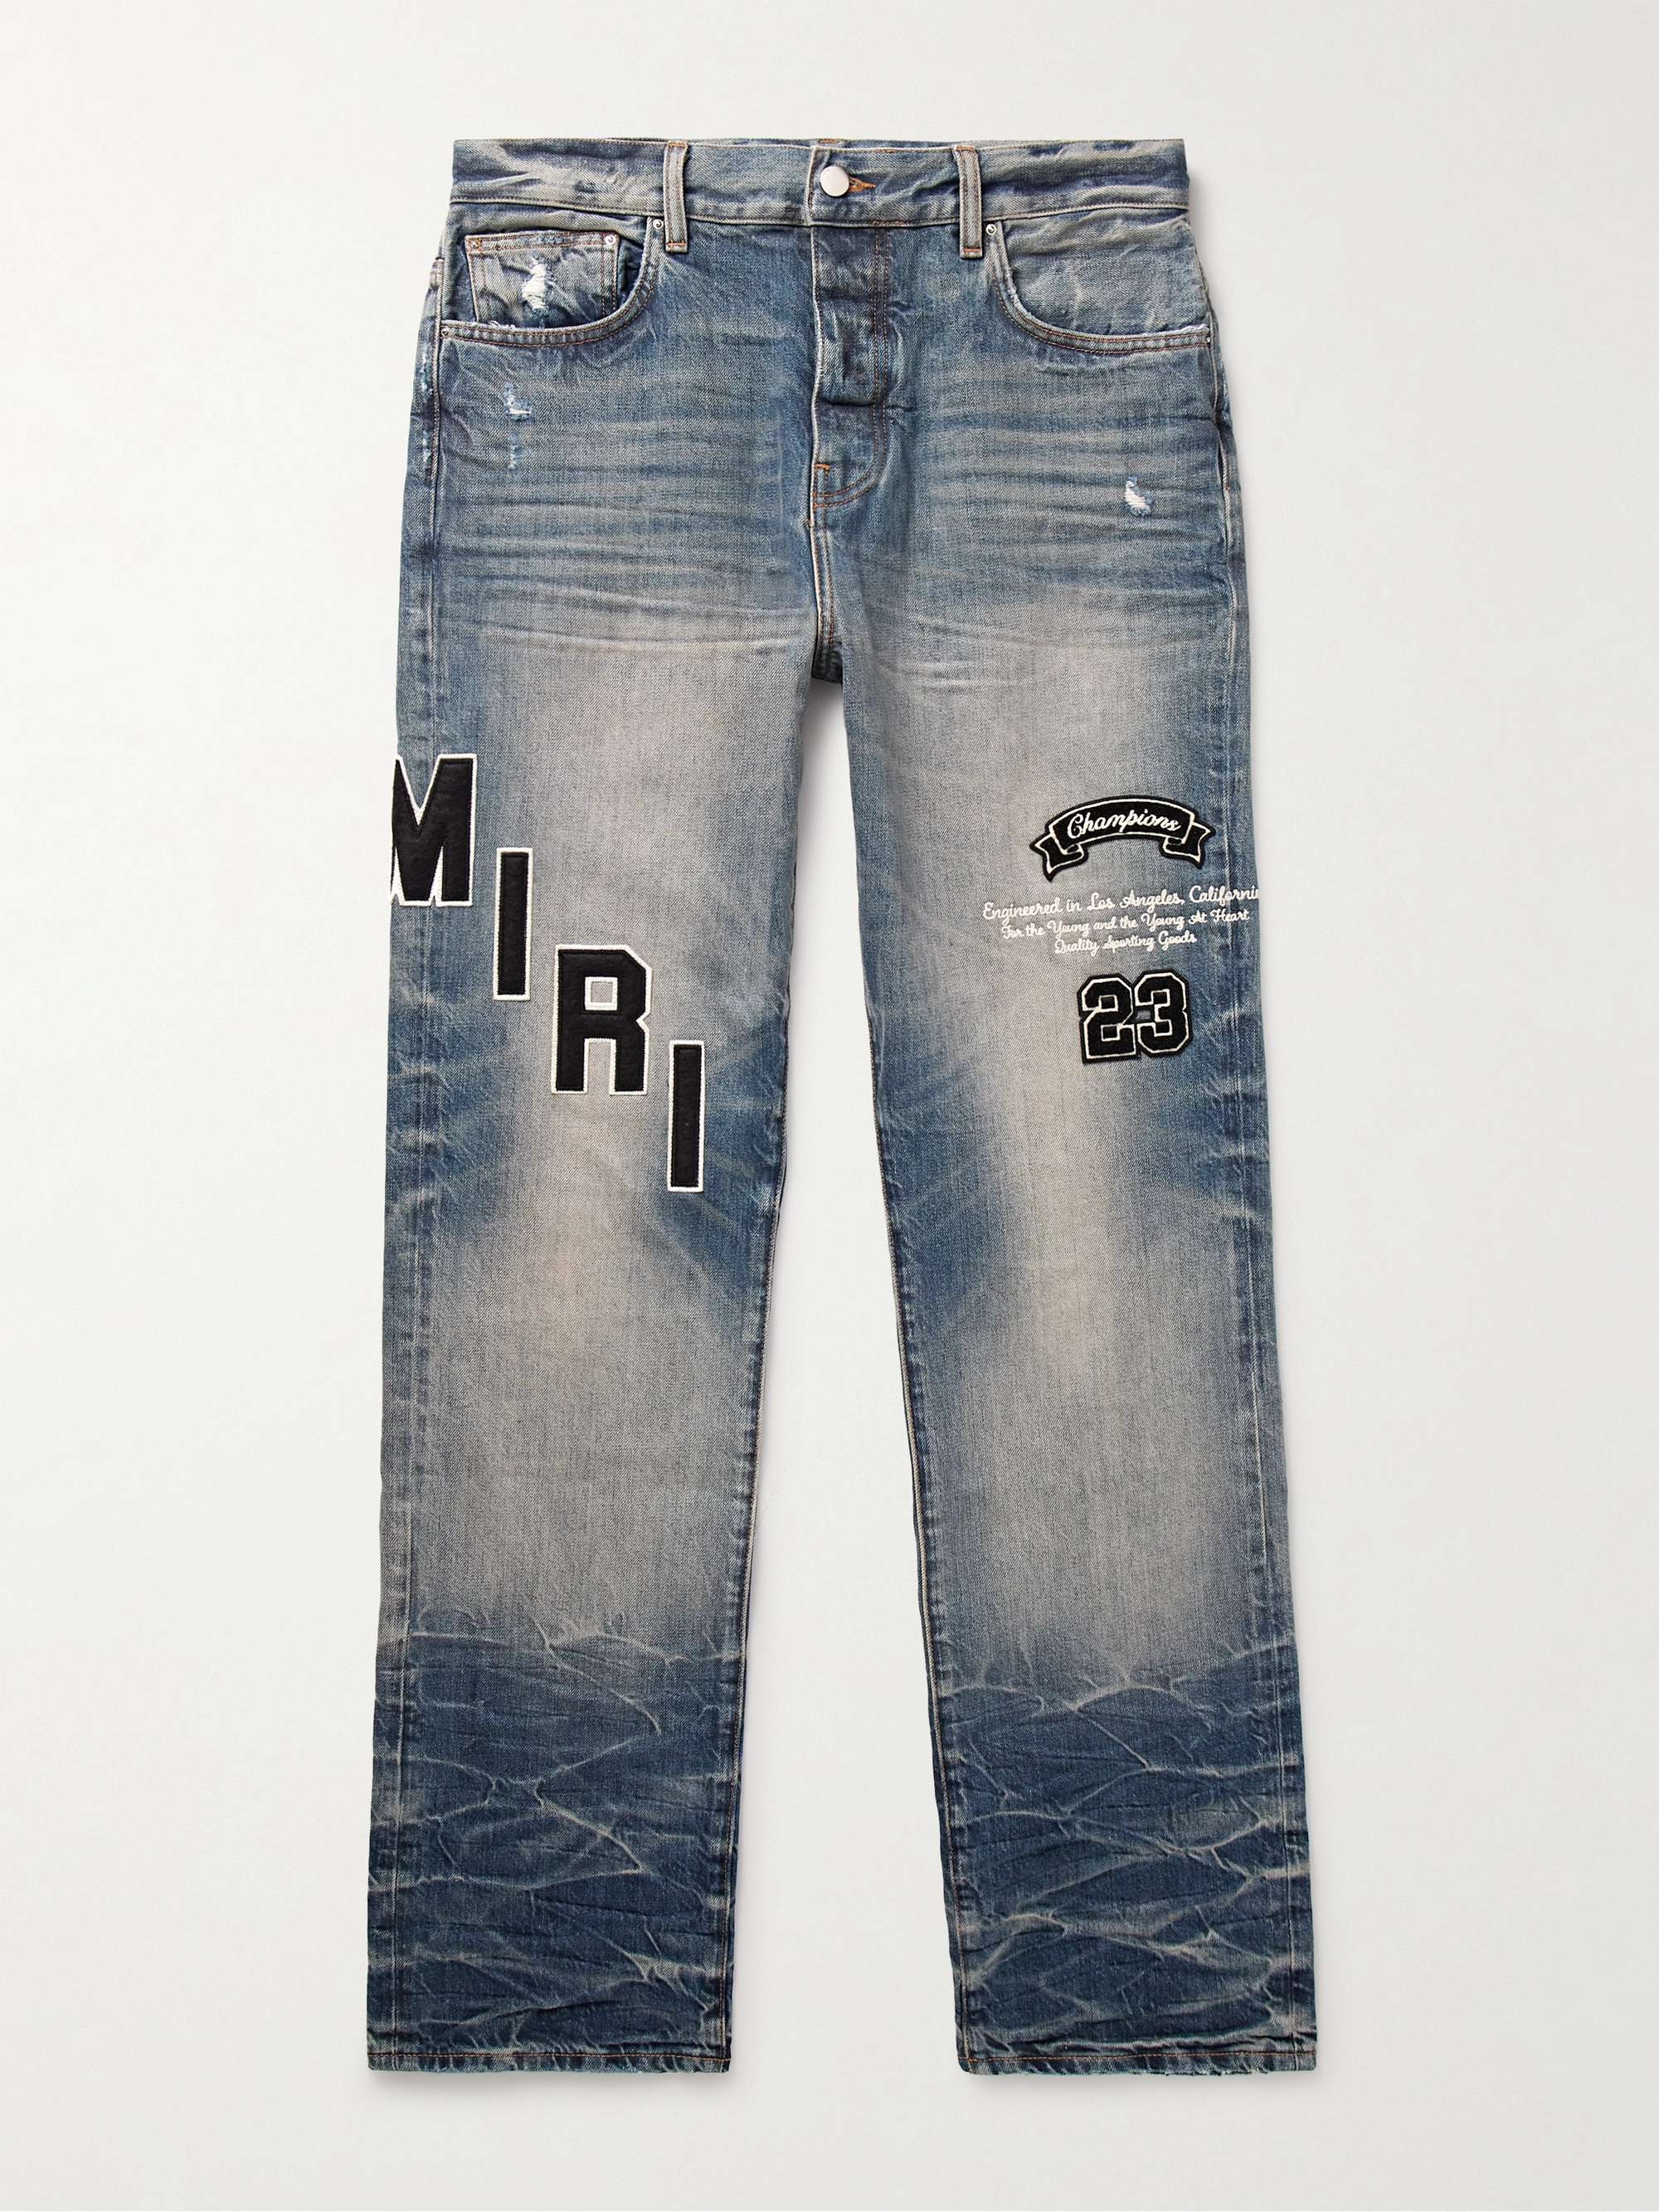 Made To Order Patchworked Portrait Denim Pants - Men - Ready-to